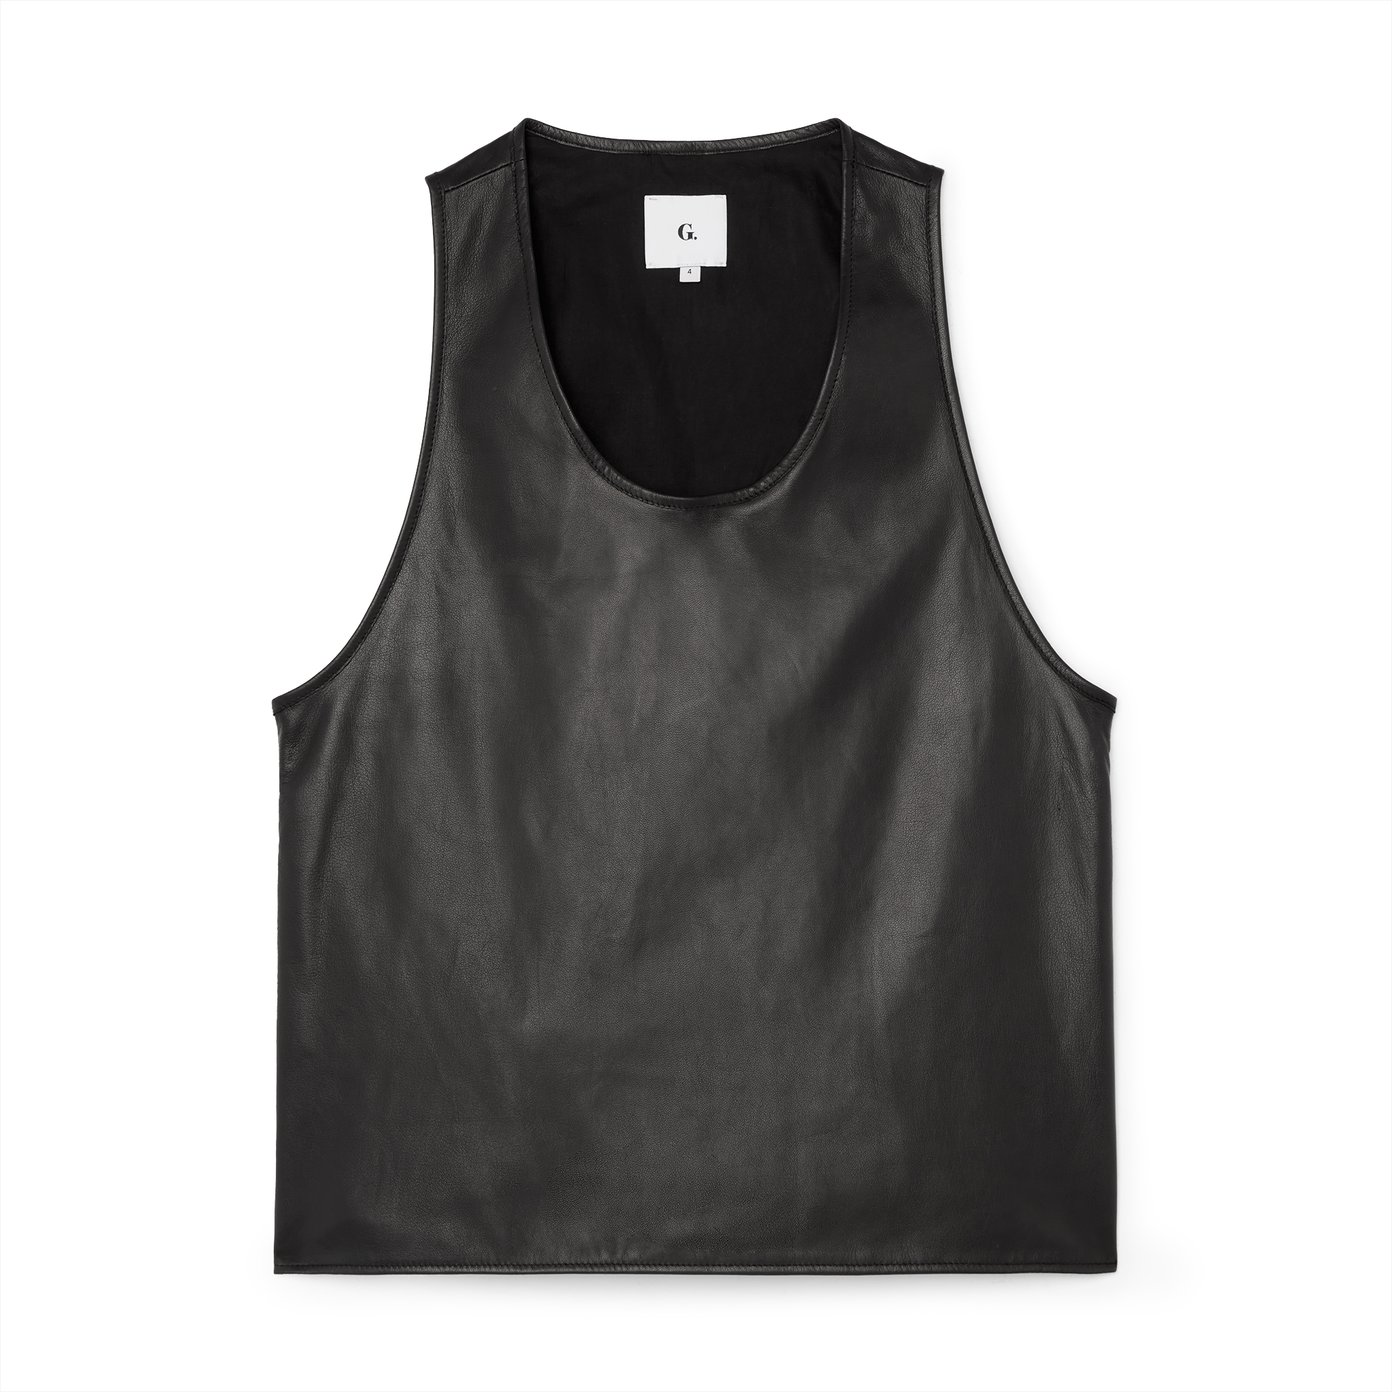 G. Label by goop Kirkendoll Leather Tank Top